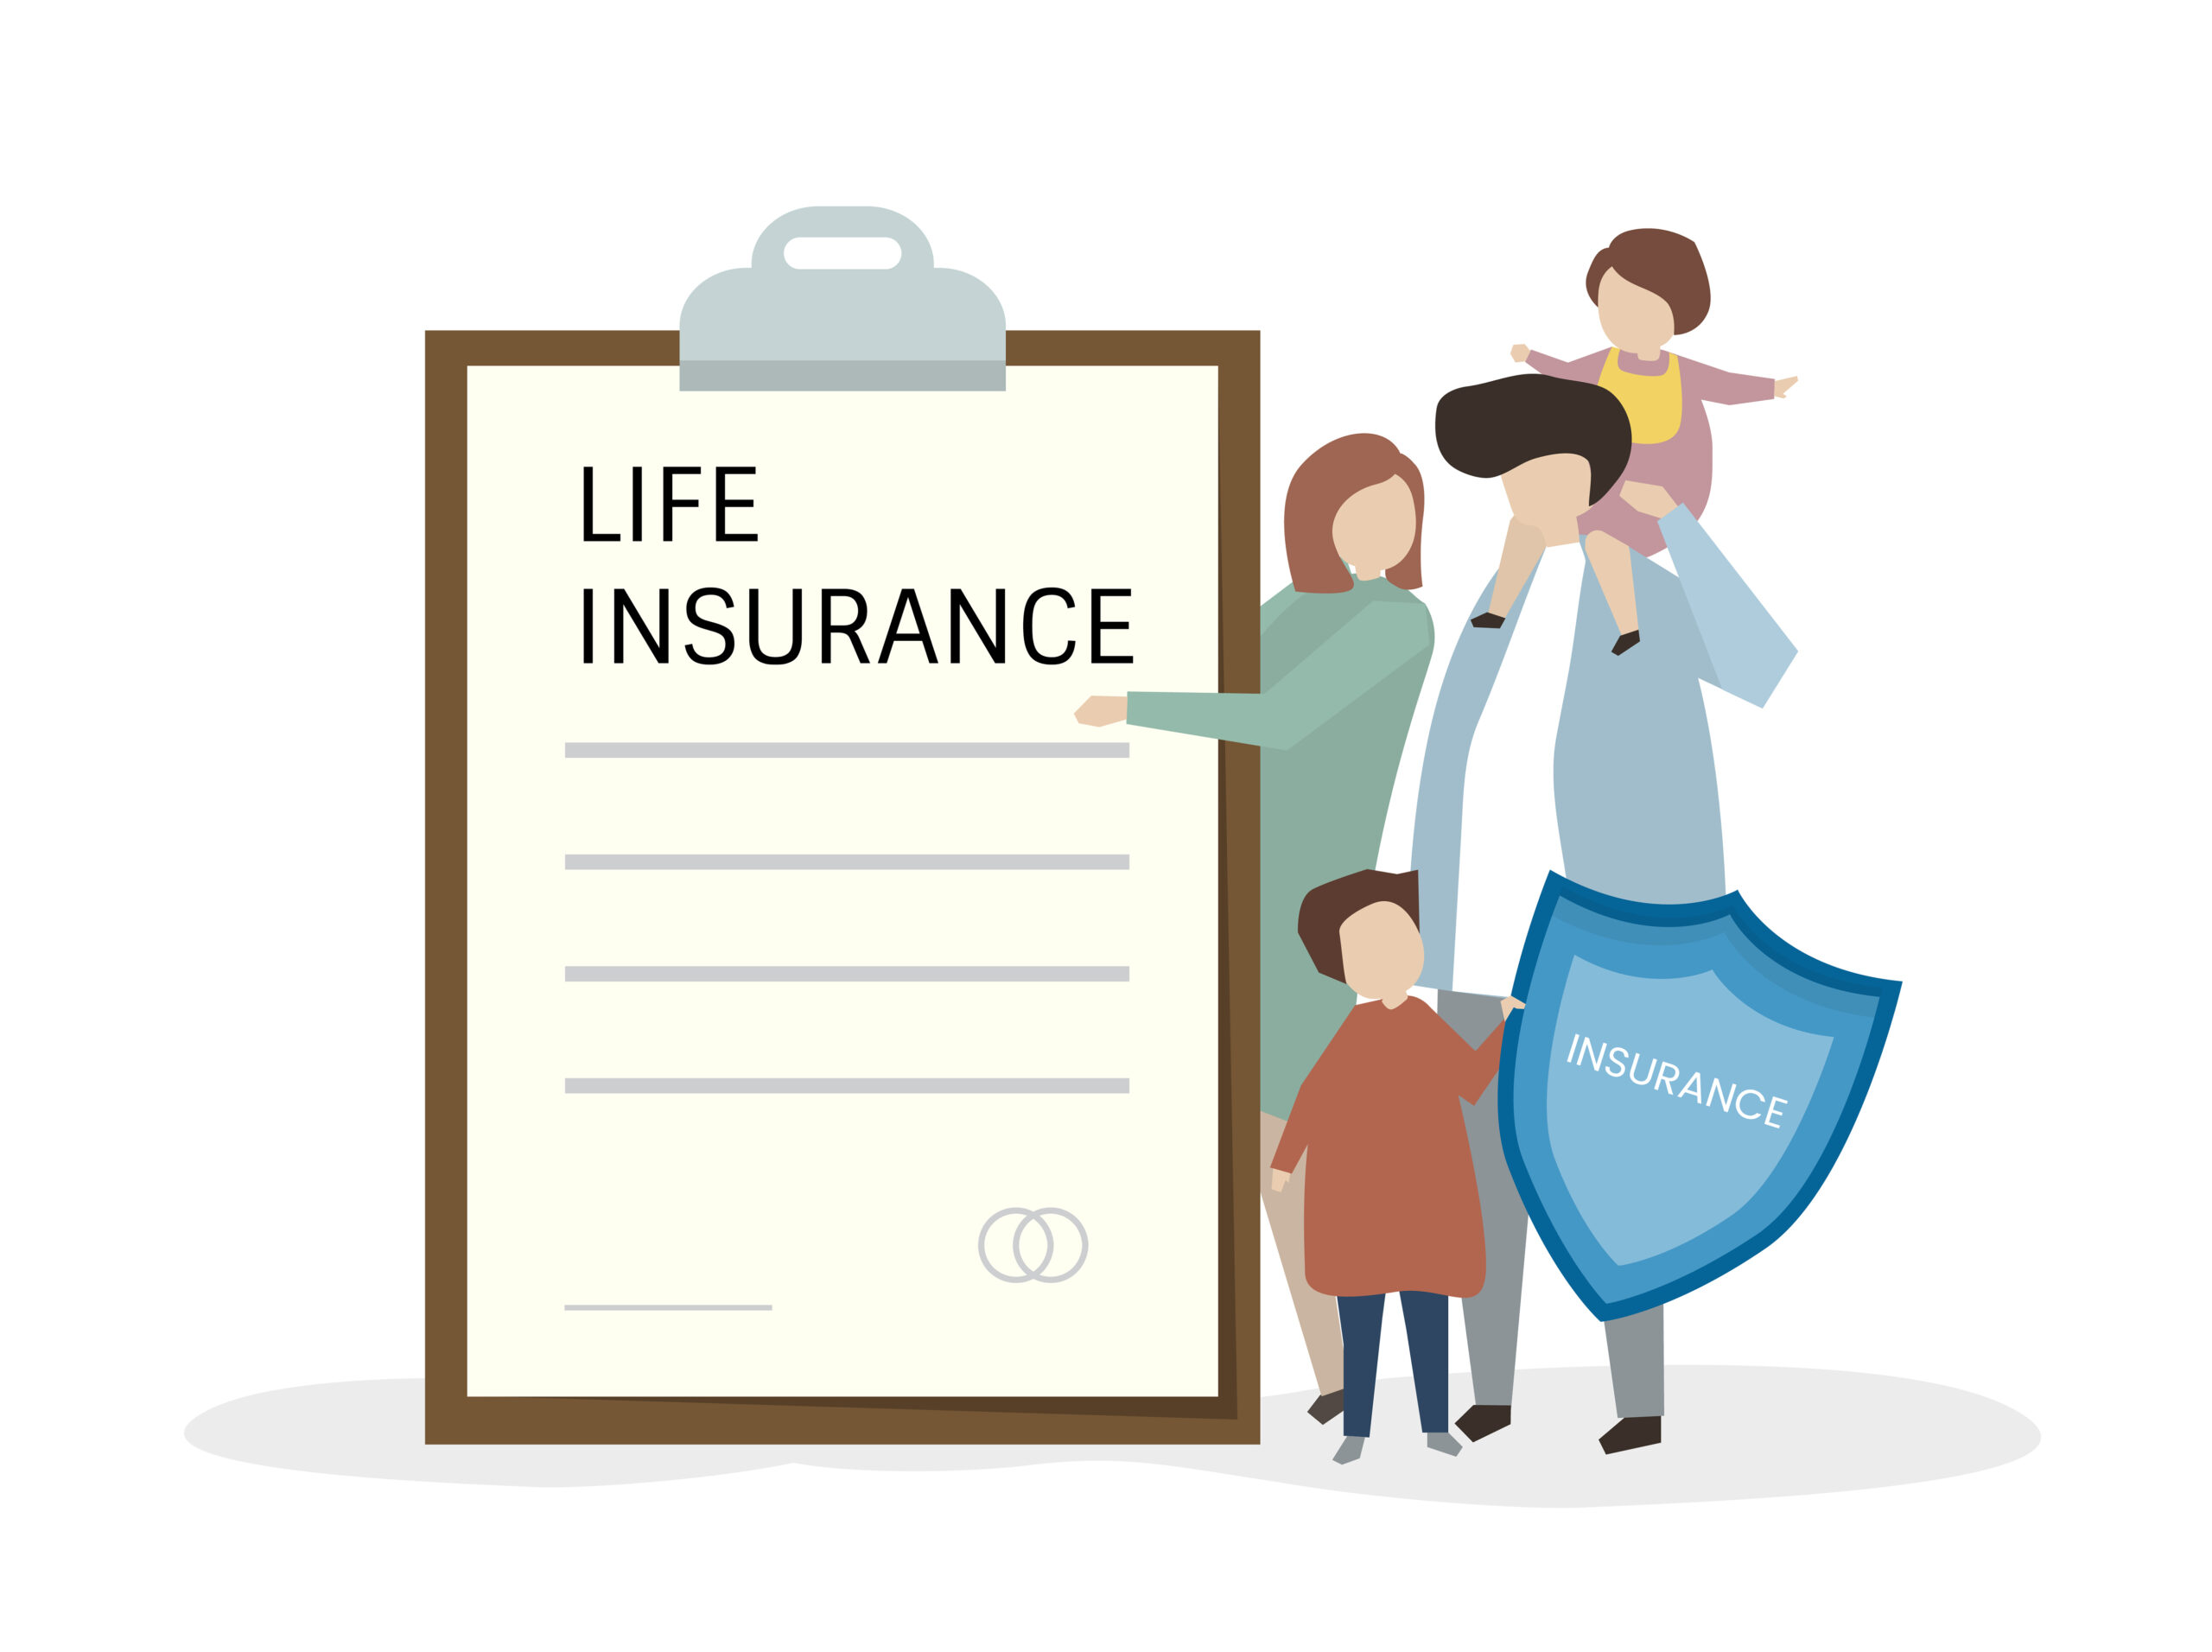 How to Generating Quality Life Insurance Leads for Agents?